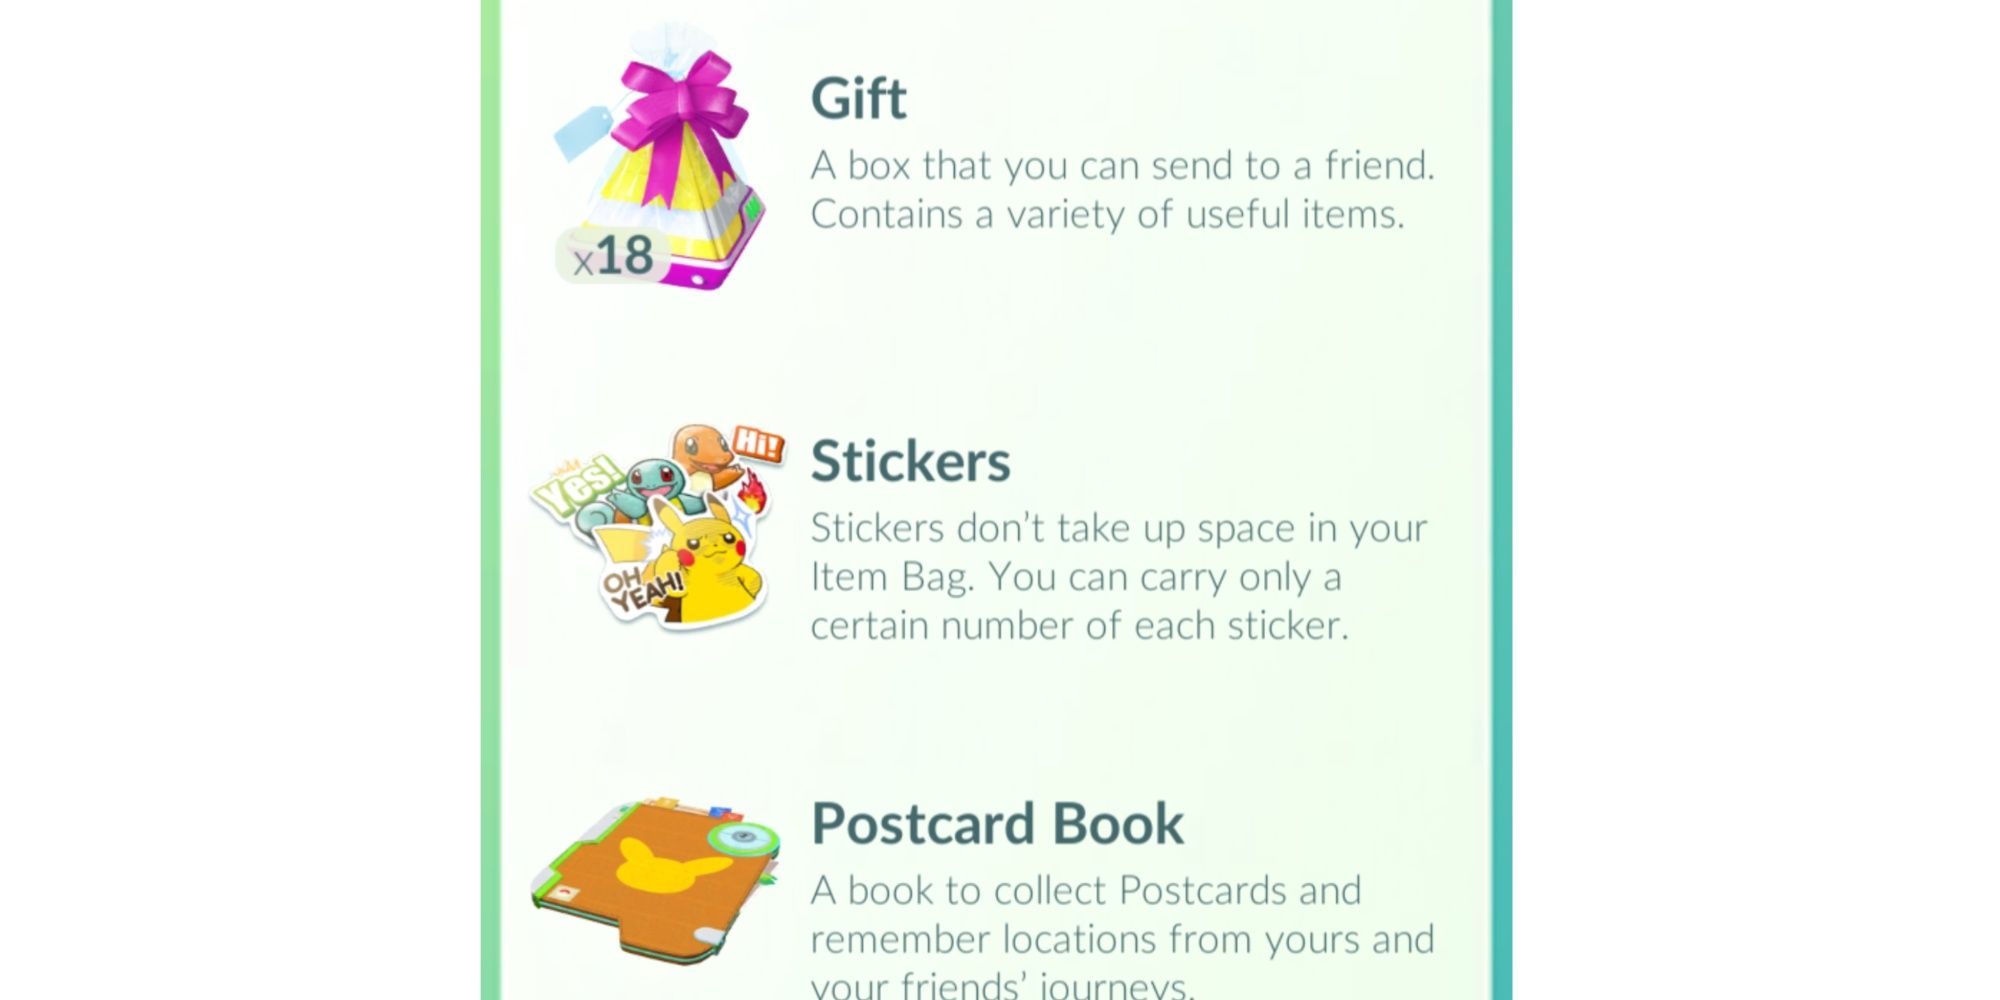 Pokemon GO Gifts and Postcards